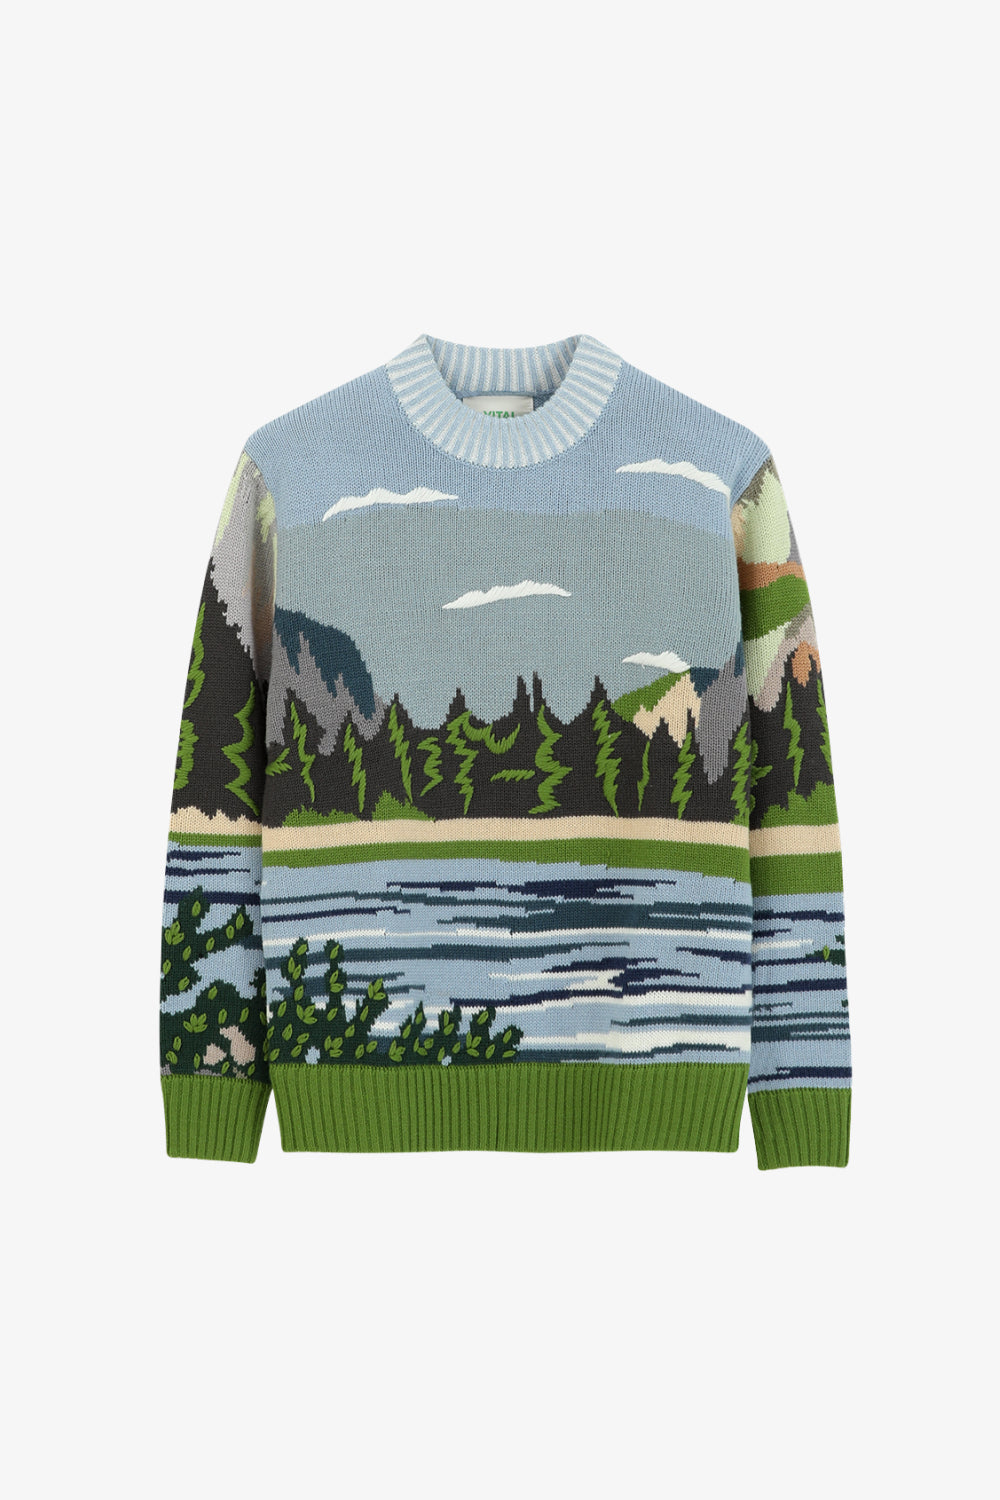 Yosemite Valley Hand Embroidery Sweater